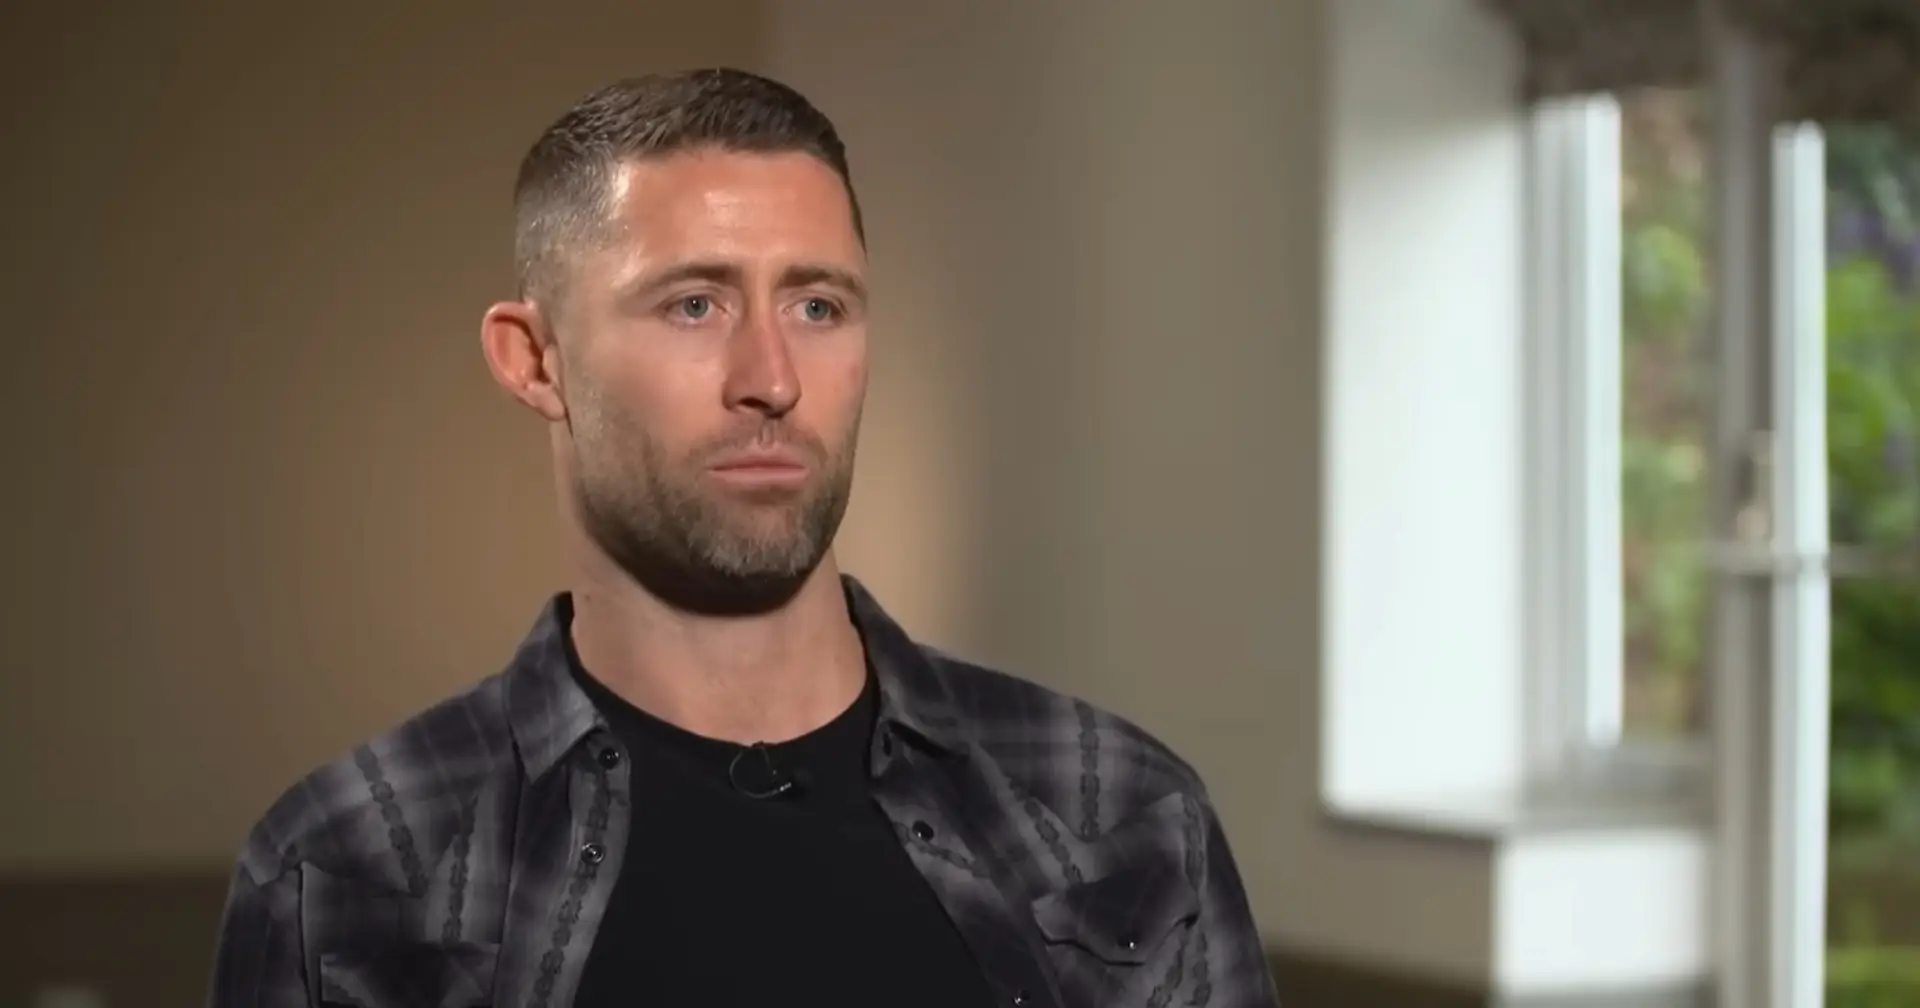 'It's not going to happen overnight': Gary Cahill calls on Chelsea fans to be patient with Chelsea's youngsters